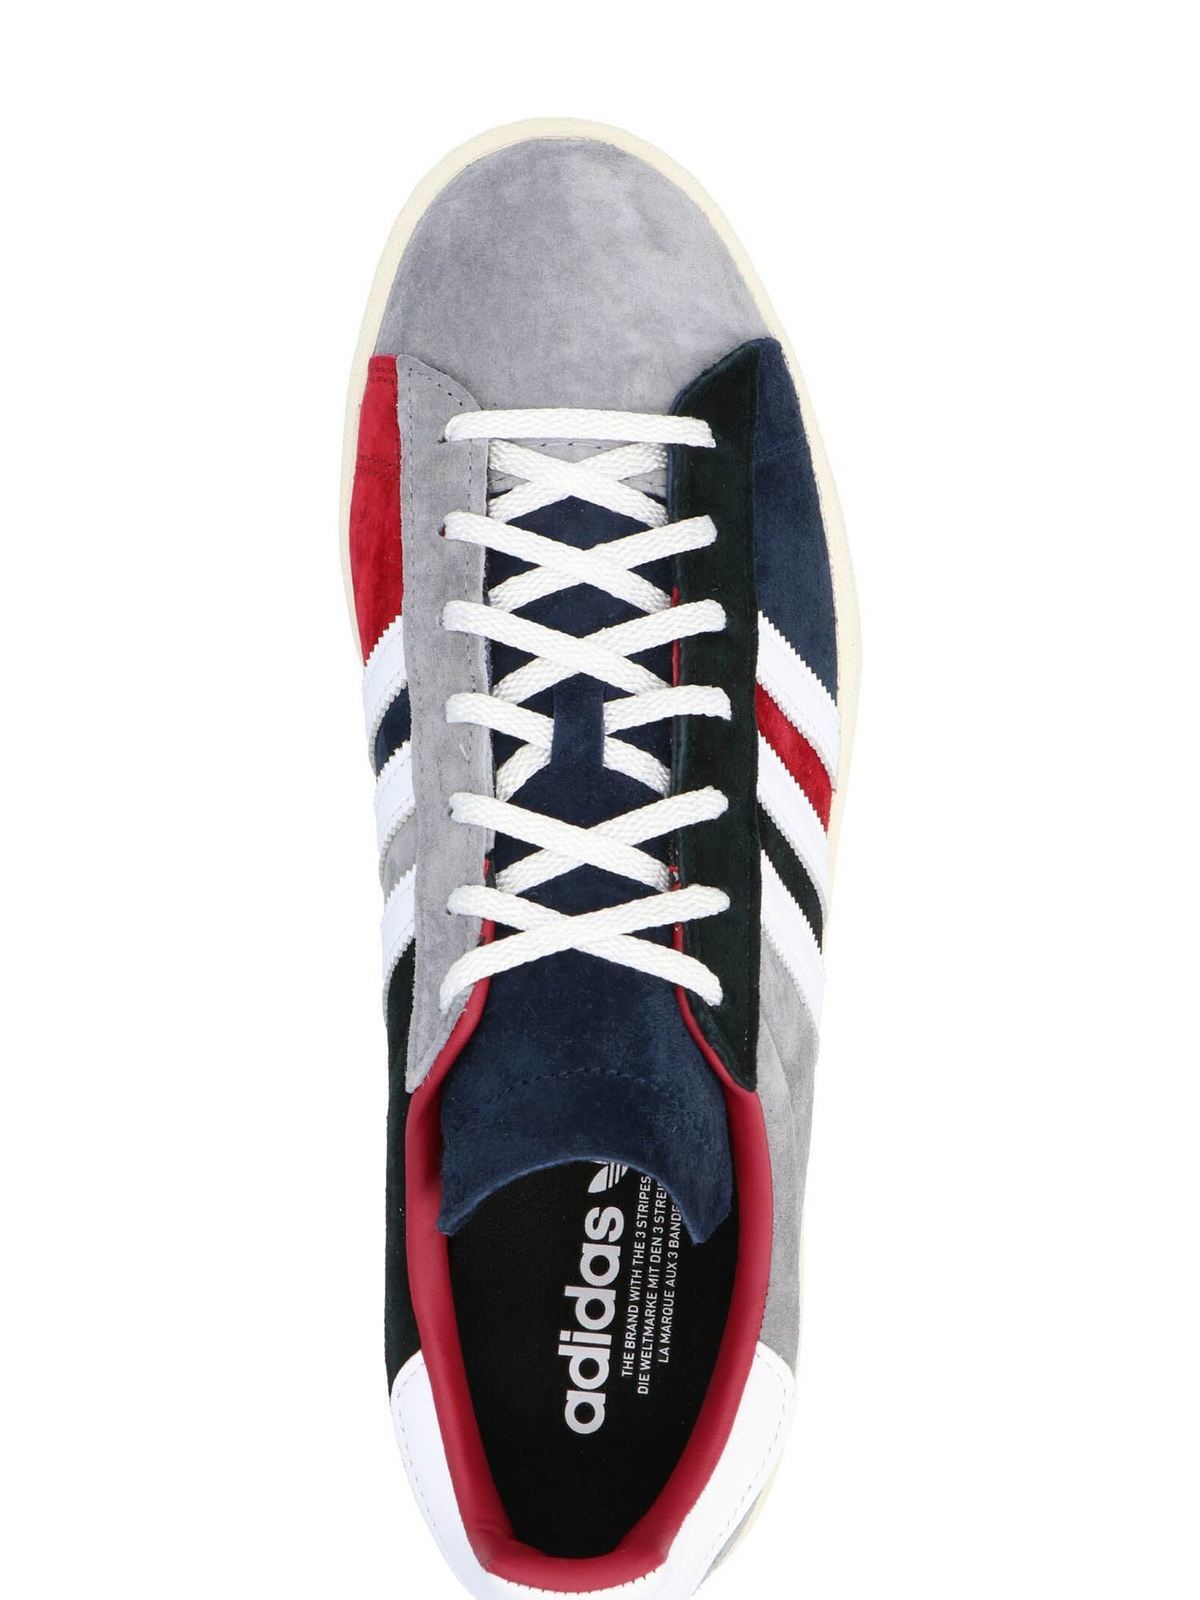 Trainers Adidas Originals - Campus 80 in blue and - FY7152